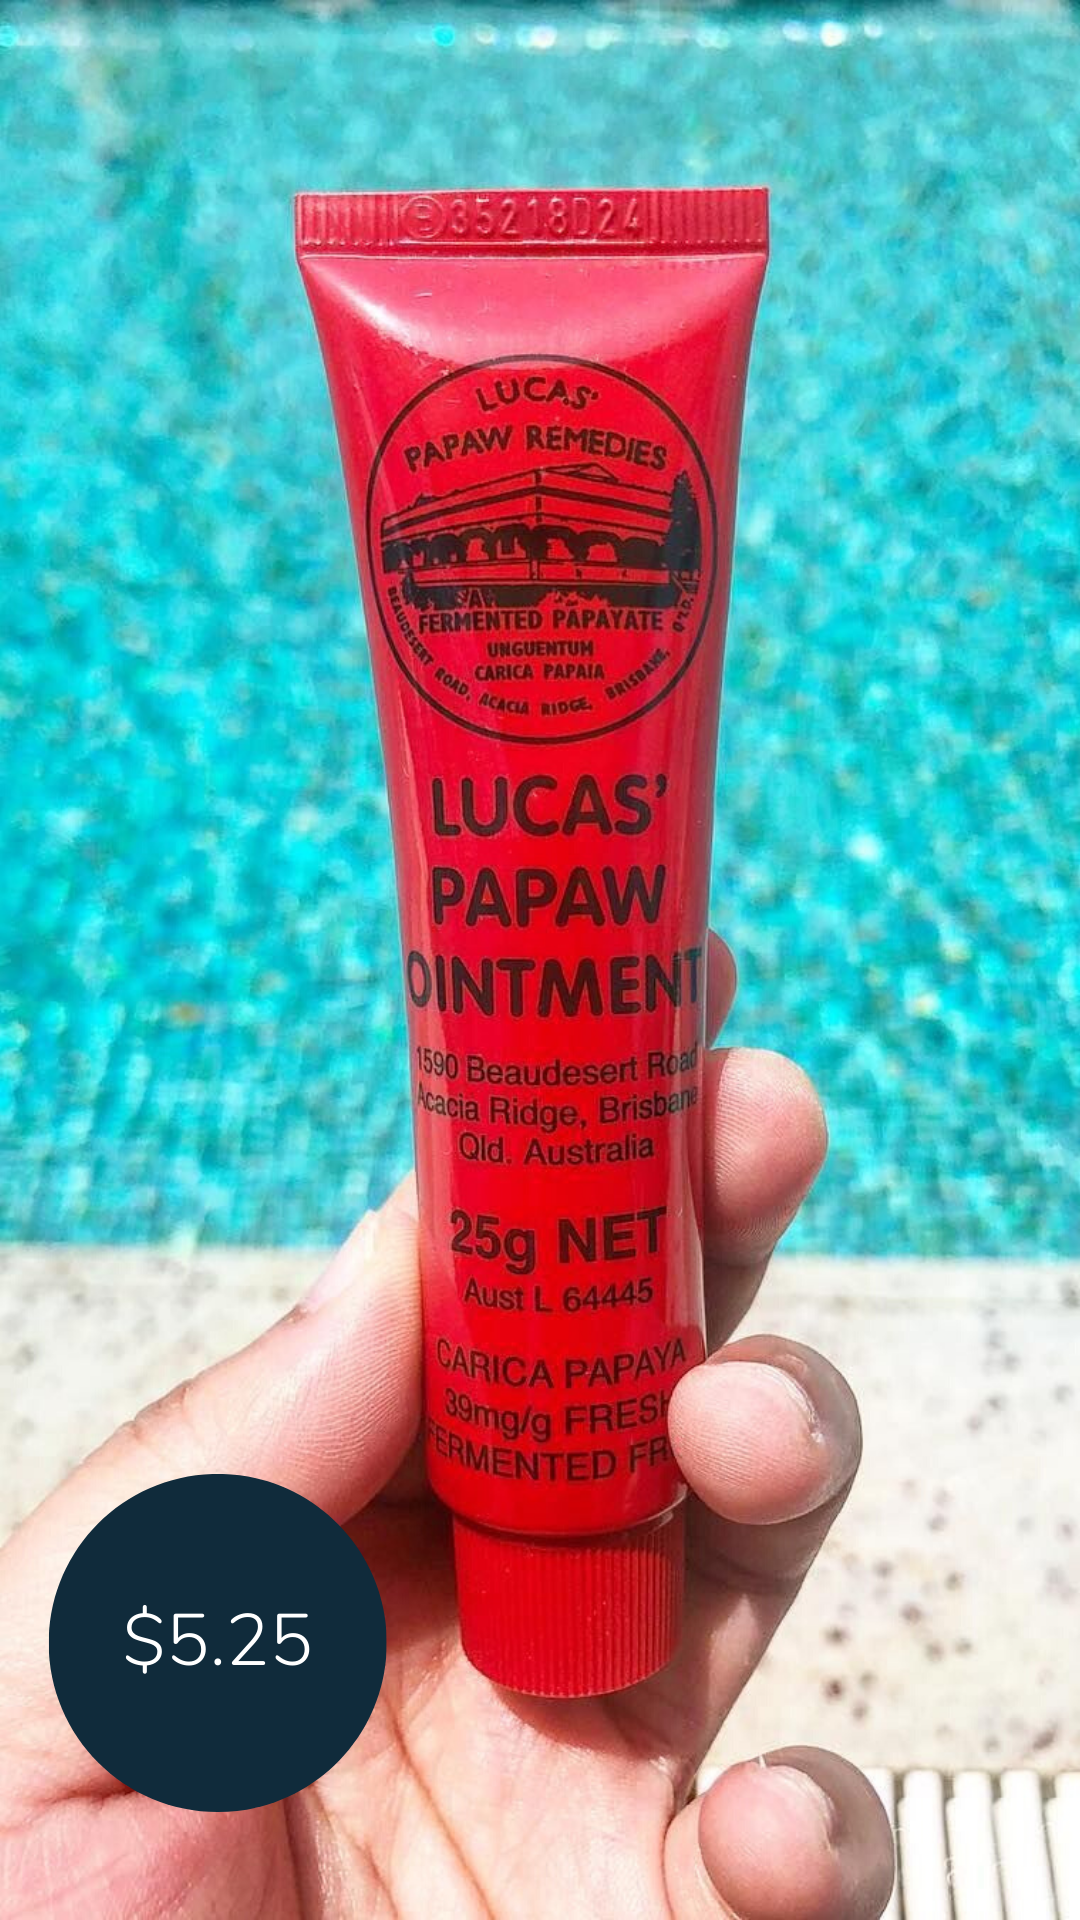 Lucas pawpaw ointment